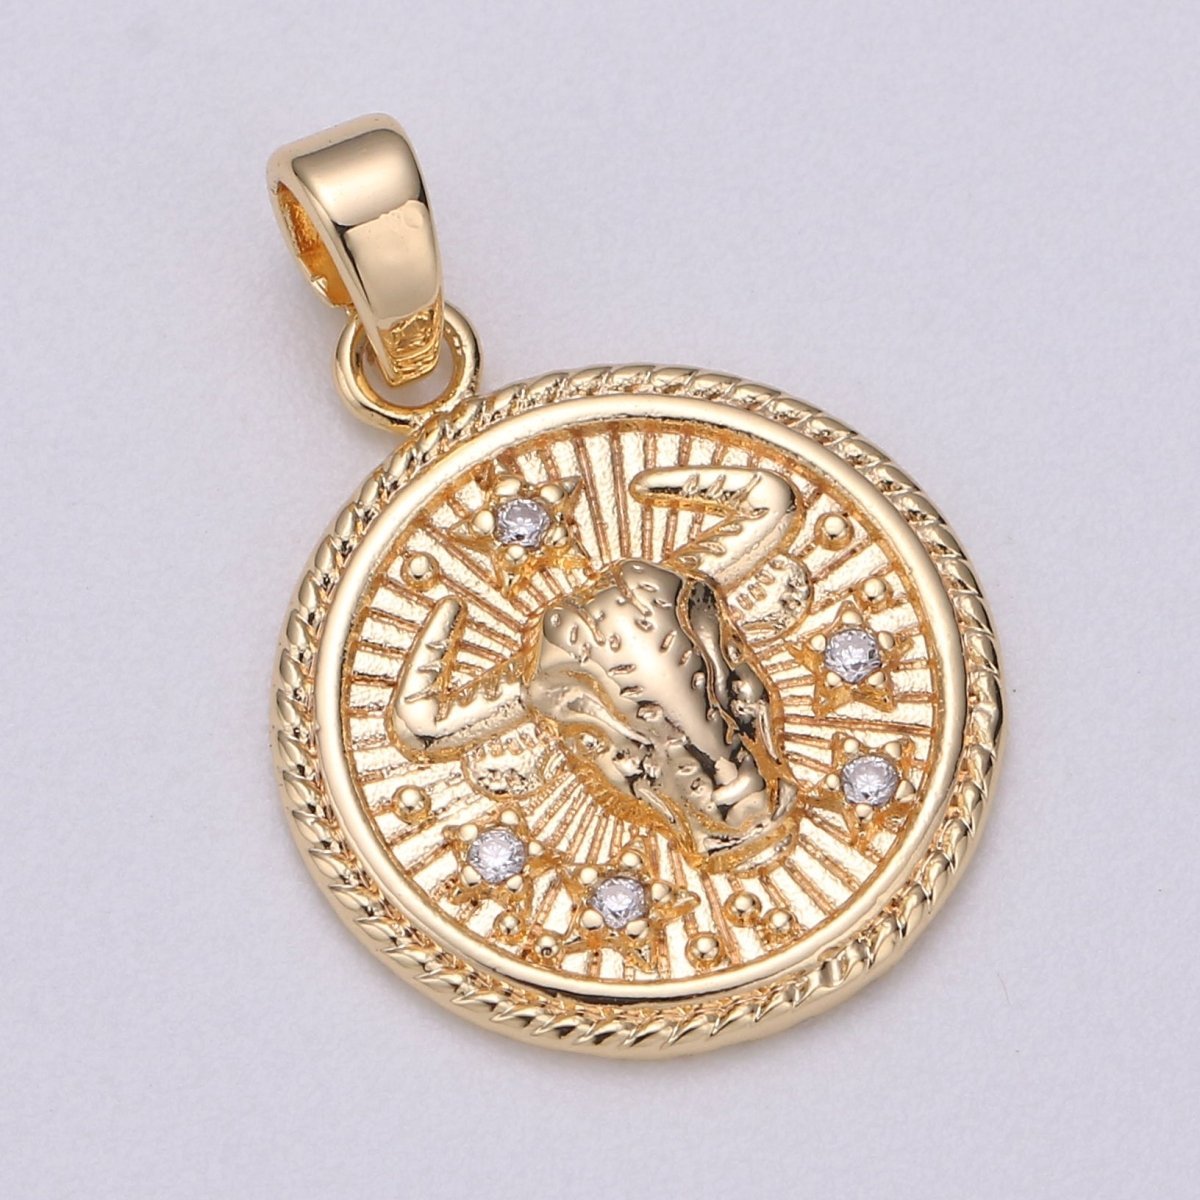 18K Gold Filled Zodiac Horoscope Sign Constellation Medallion Pendant Charm Textured Coin Decorative Edge for Necklace Jewelry Making | A-417-A-428 - DLUXCA